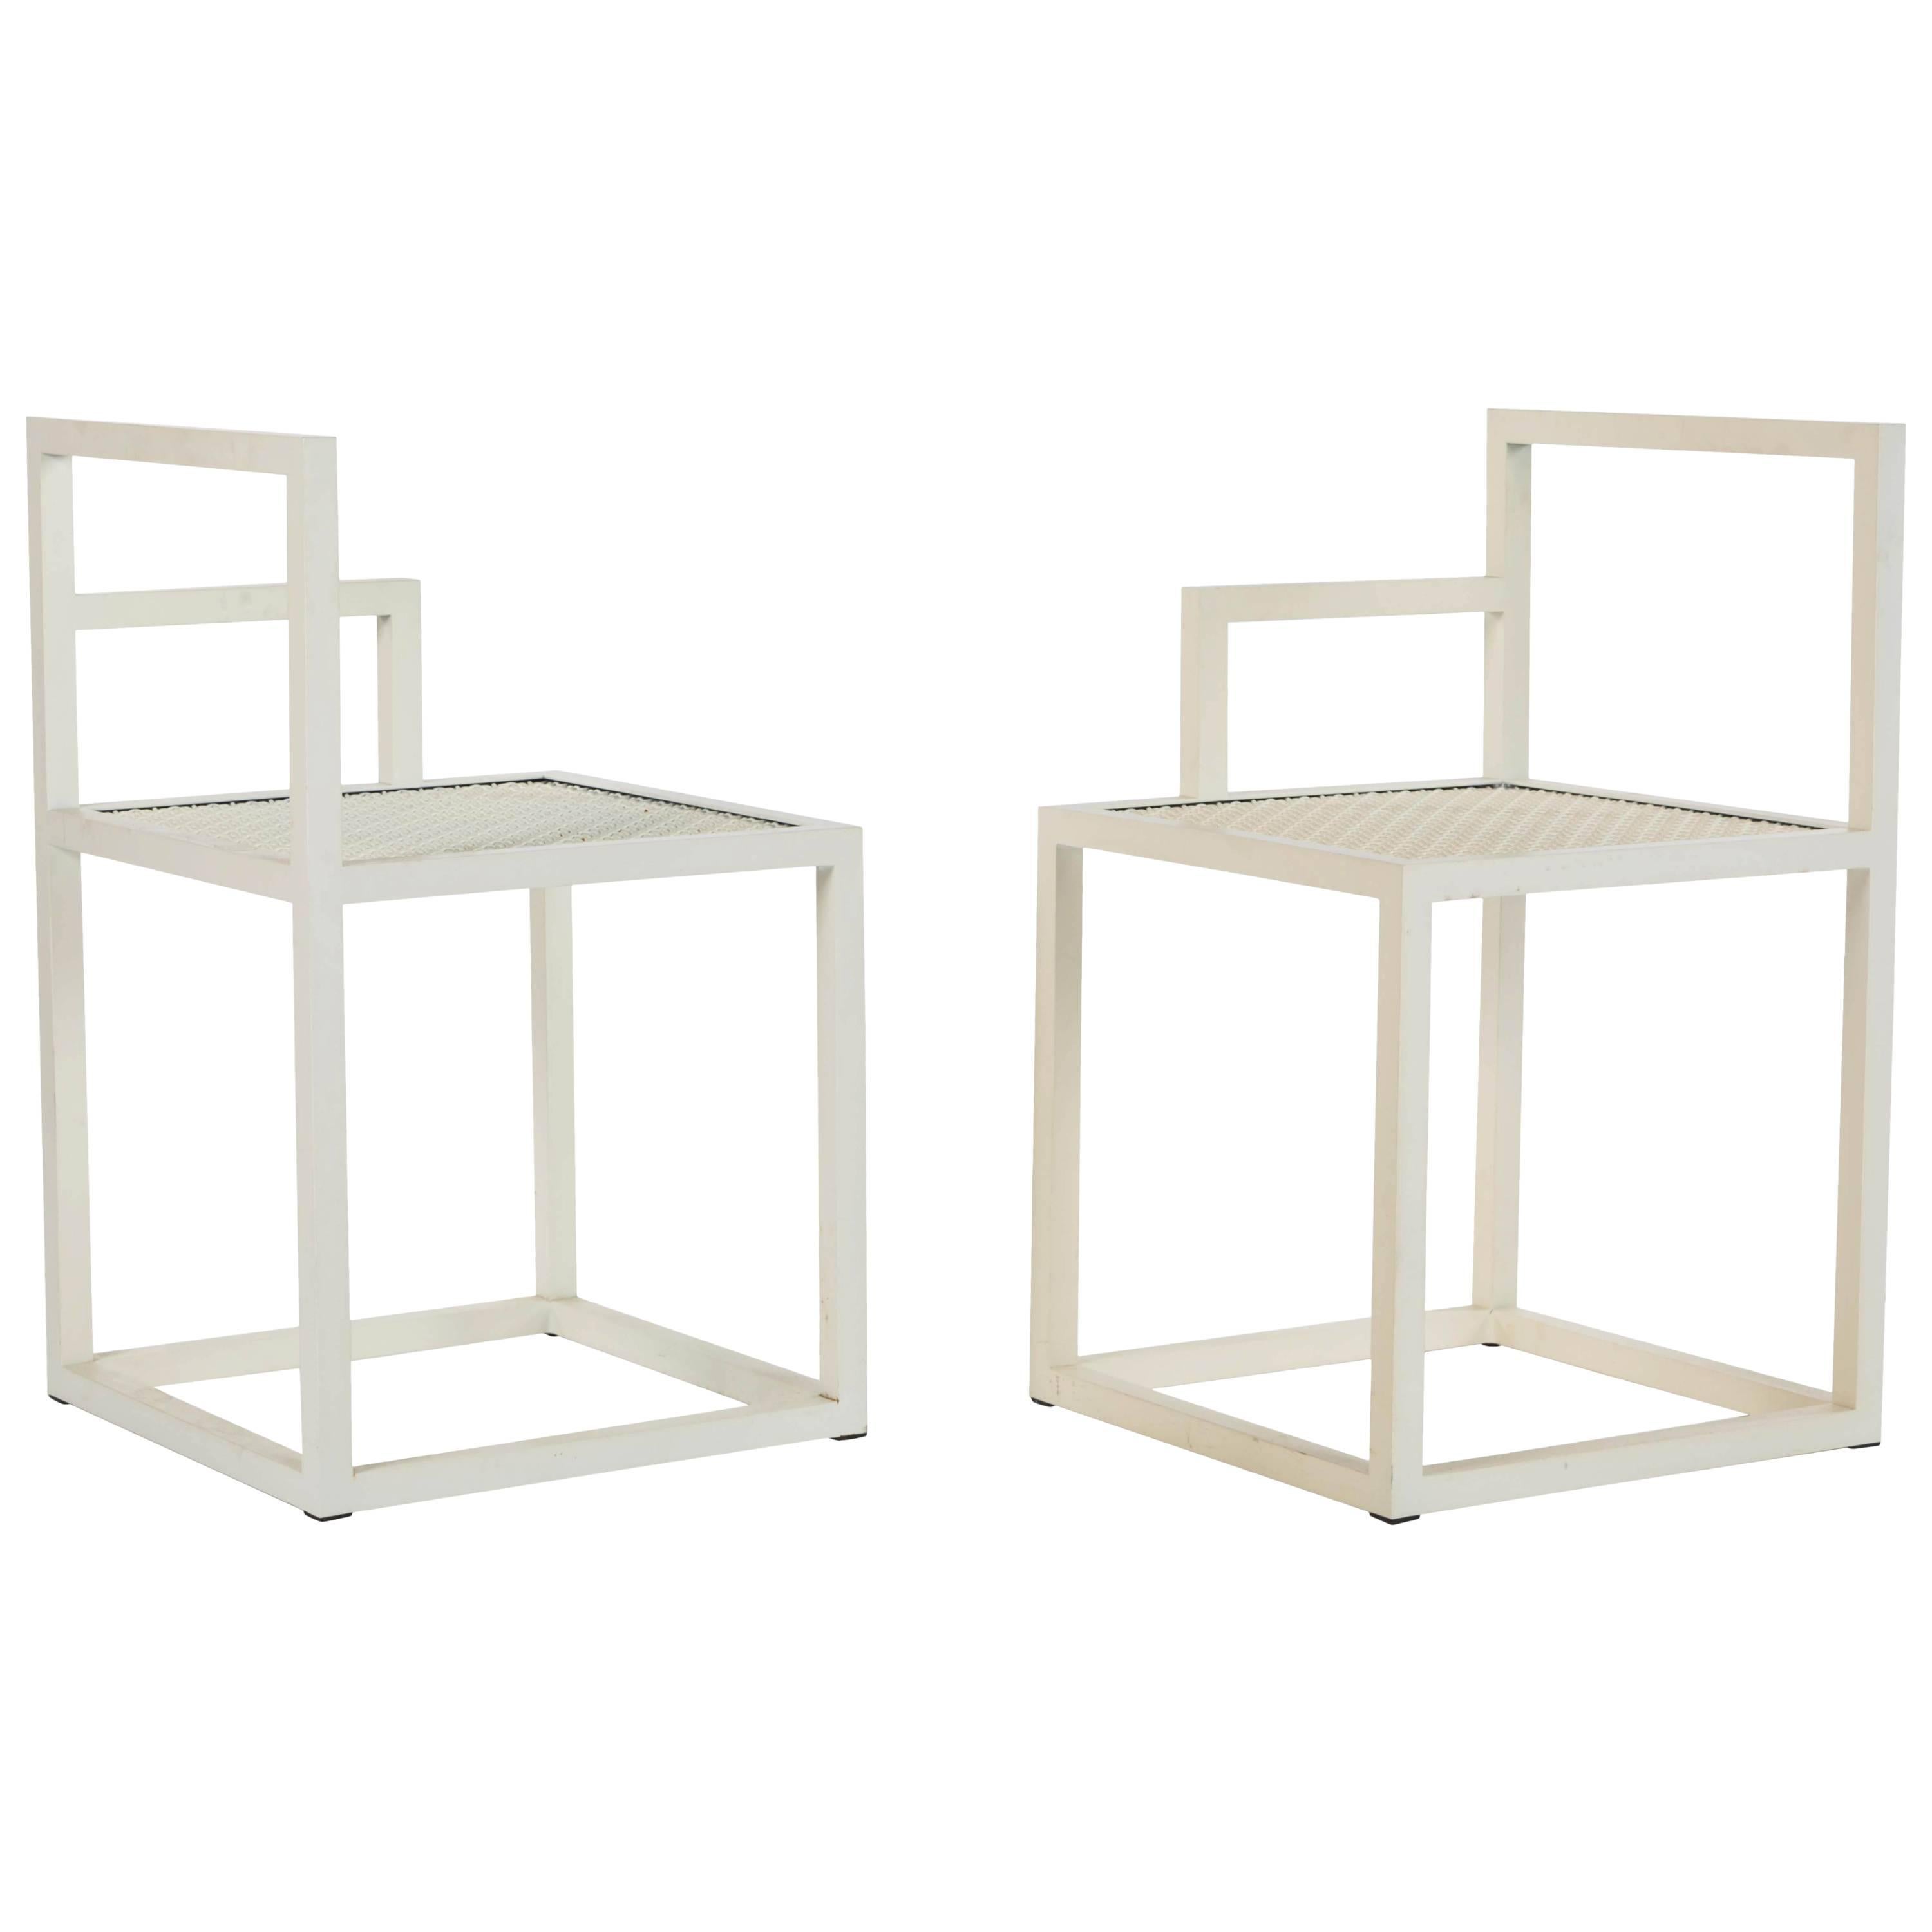 Pair of White Modern Powder Coated Steel Prototype Sol Chairs by Jonathan Nesci For Sale